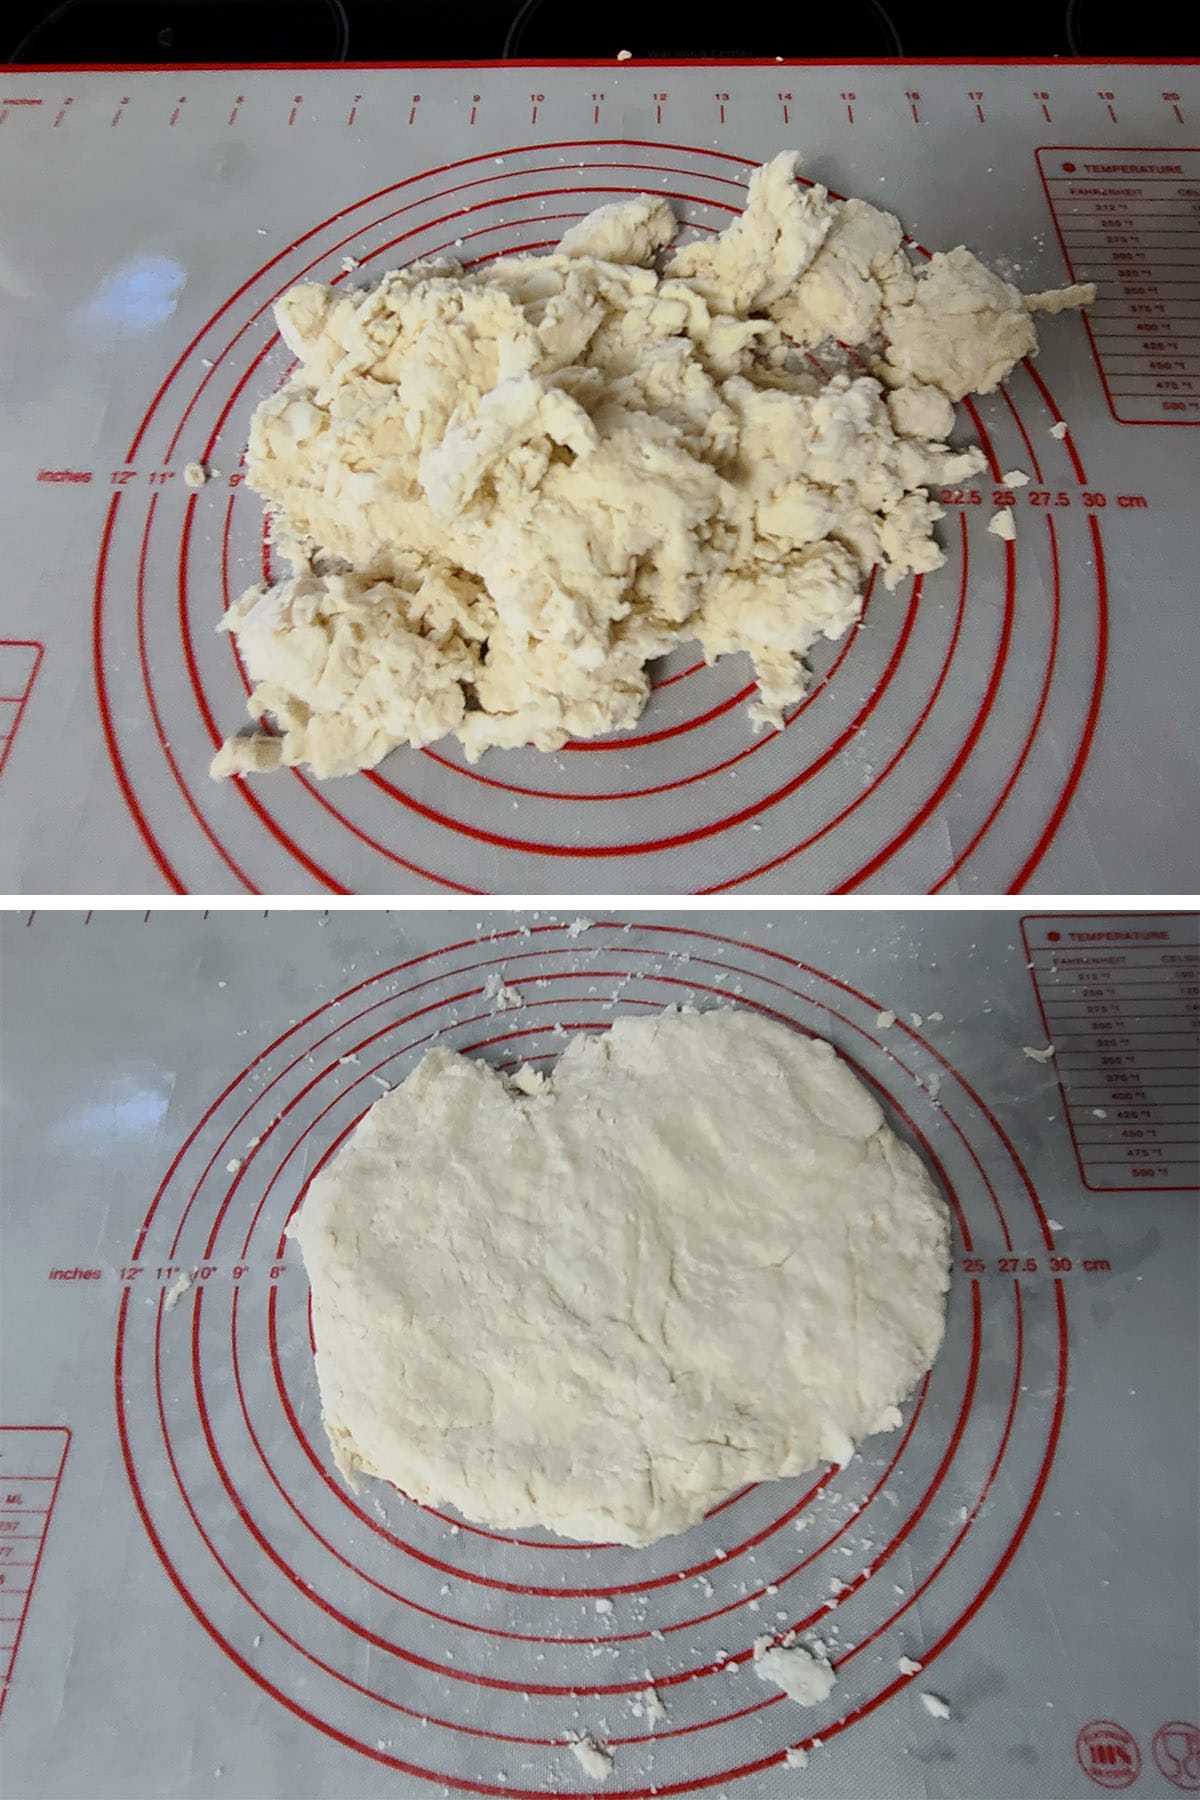 The baking powder biscuit dough is turned out onto a work surface and rolled out.